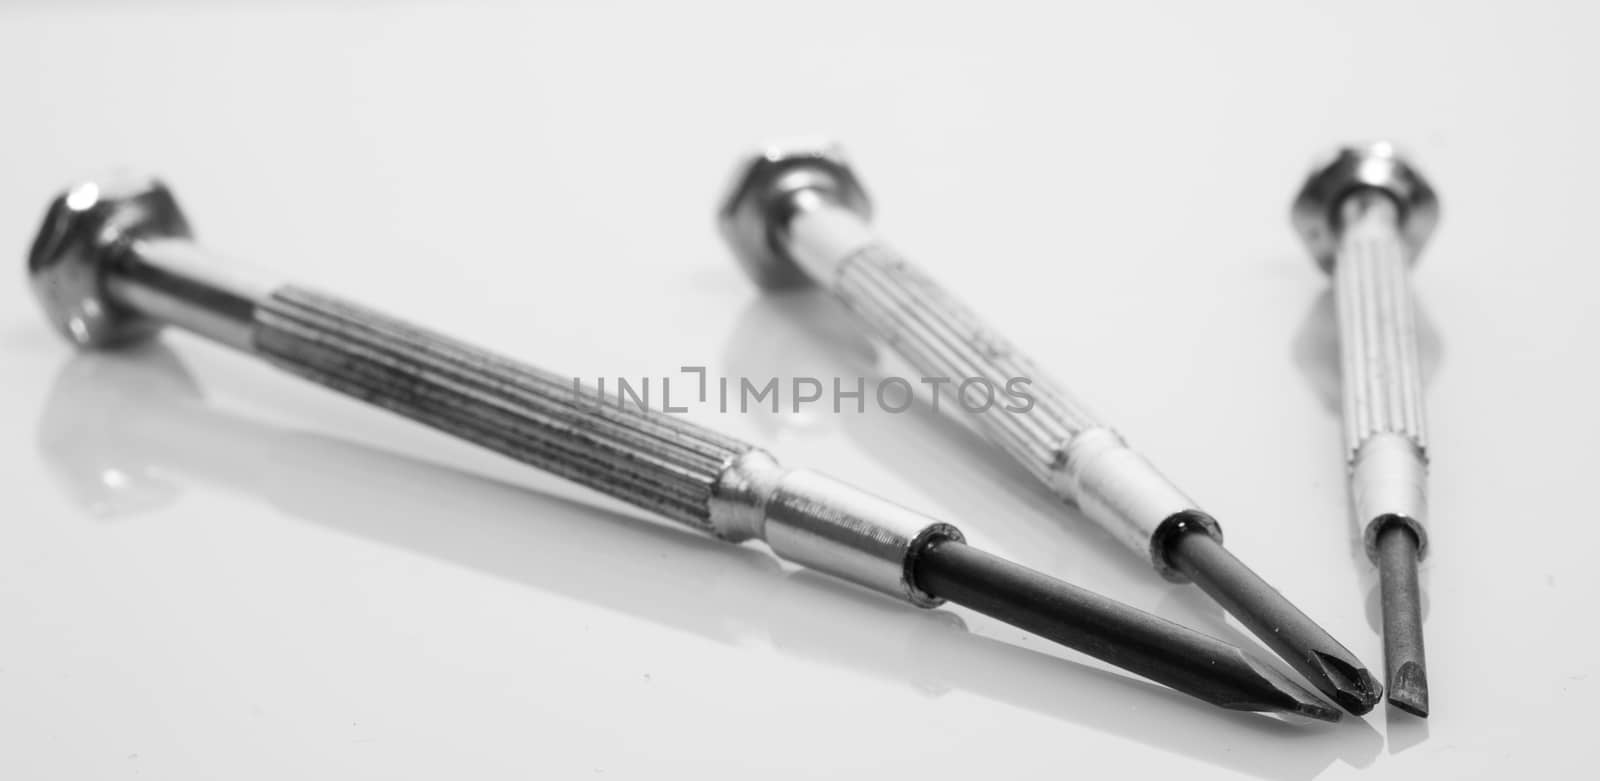 Set of three jewellers scredrivers on a white background with shallow depth of field